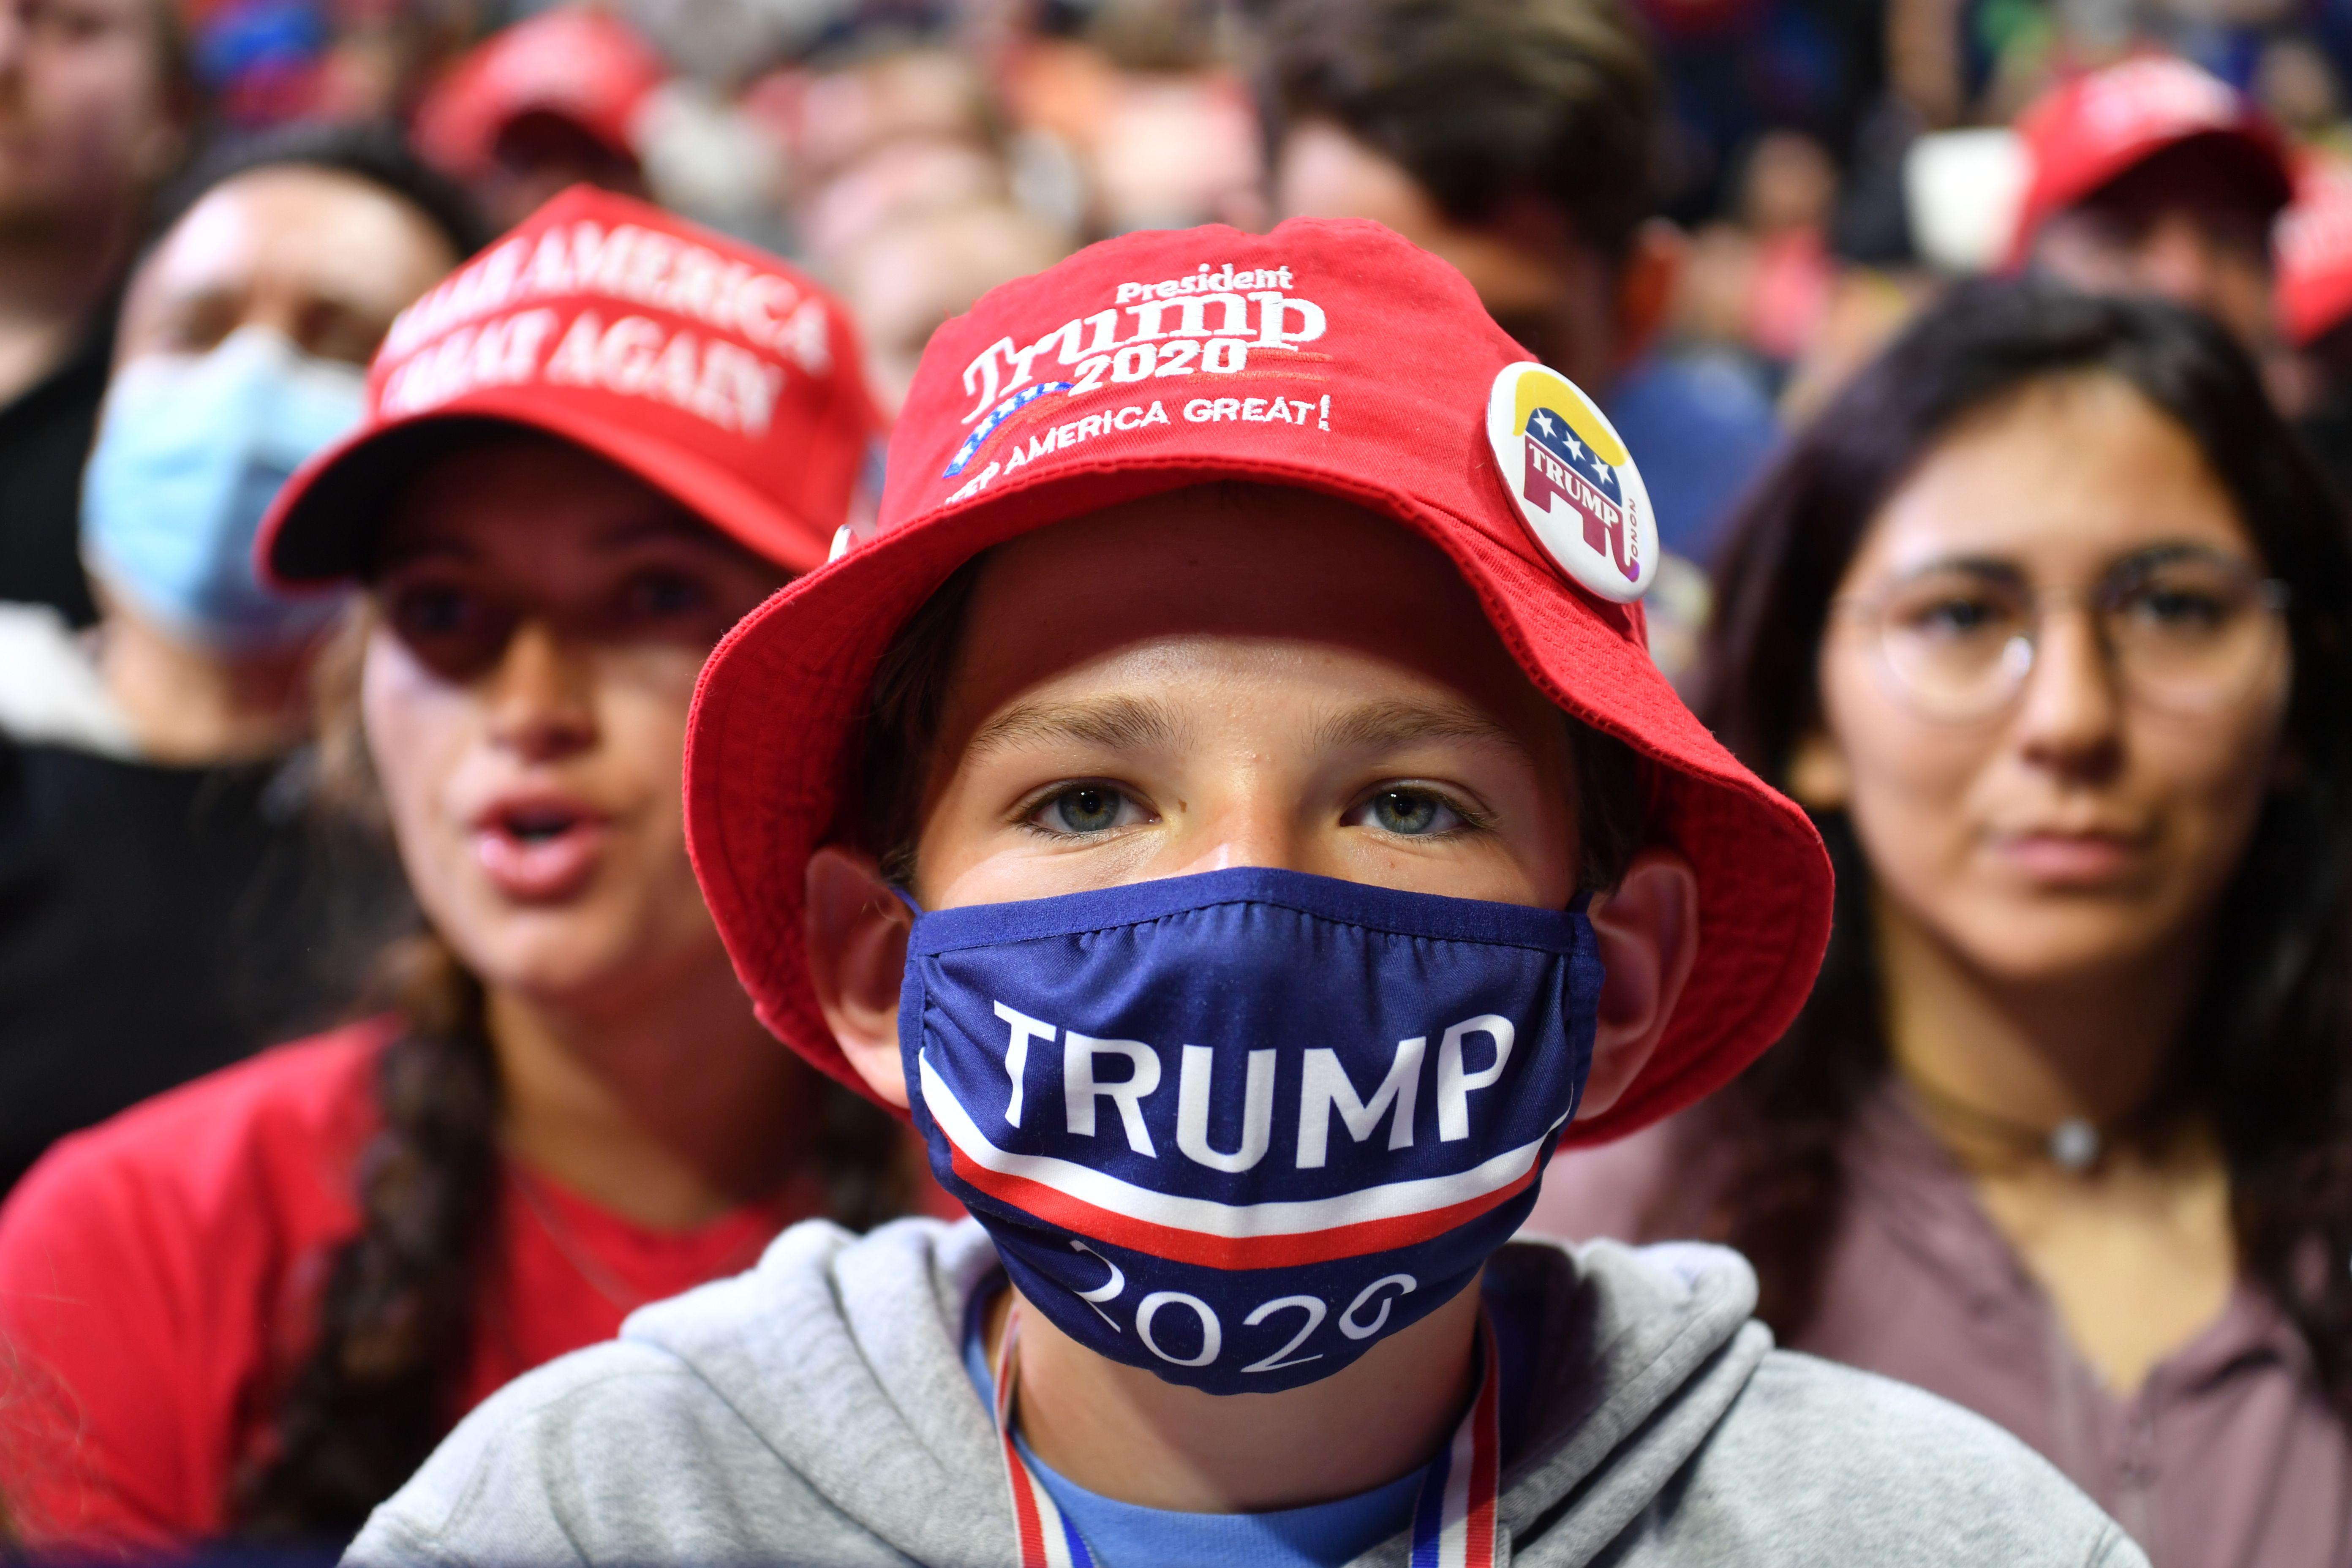 A young boy wears a Trump 2020 mask and a red hat. He's surrounded by others in similar gear.